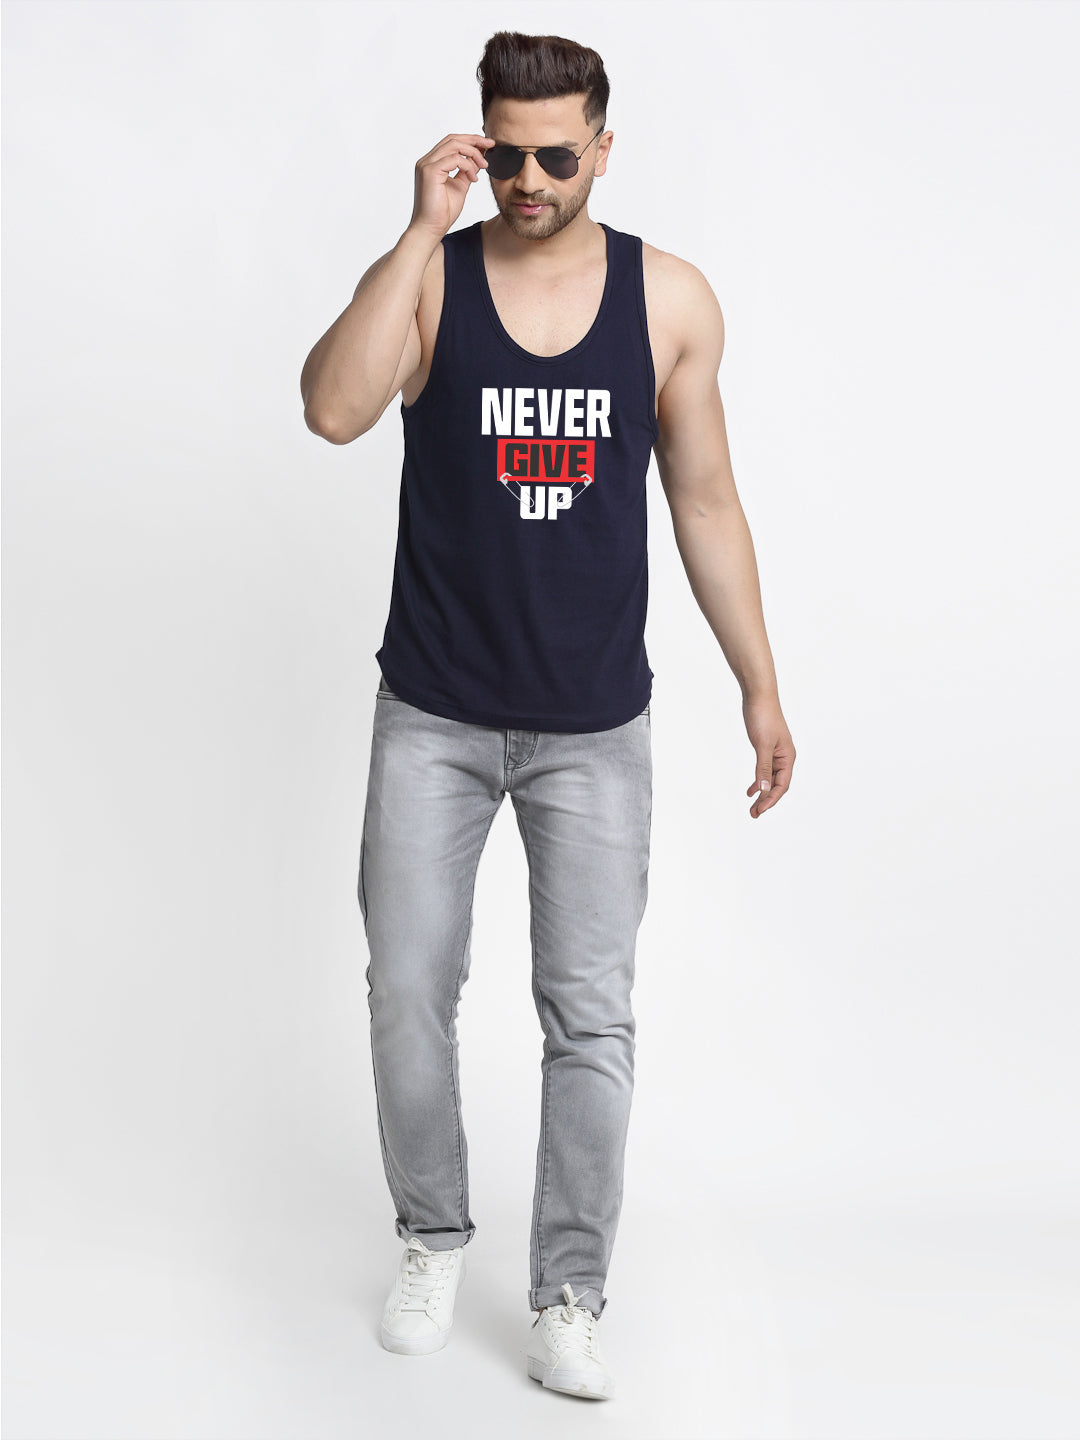 Men's Never Give Up printed Sleeveless Pure Cotton Gym Vest - Friskers